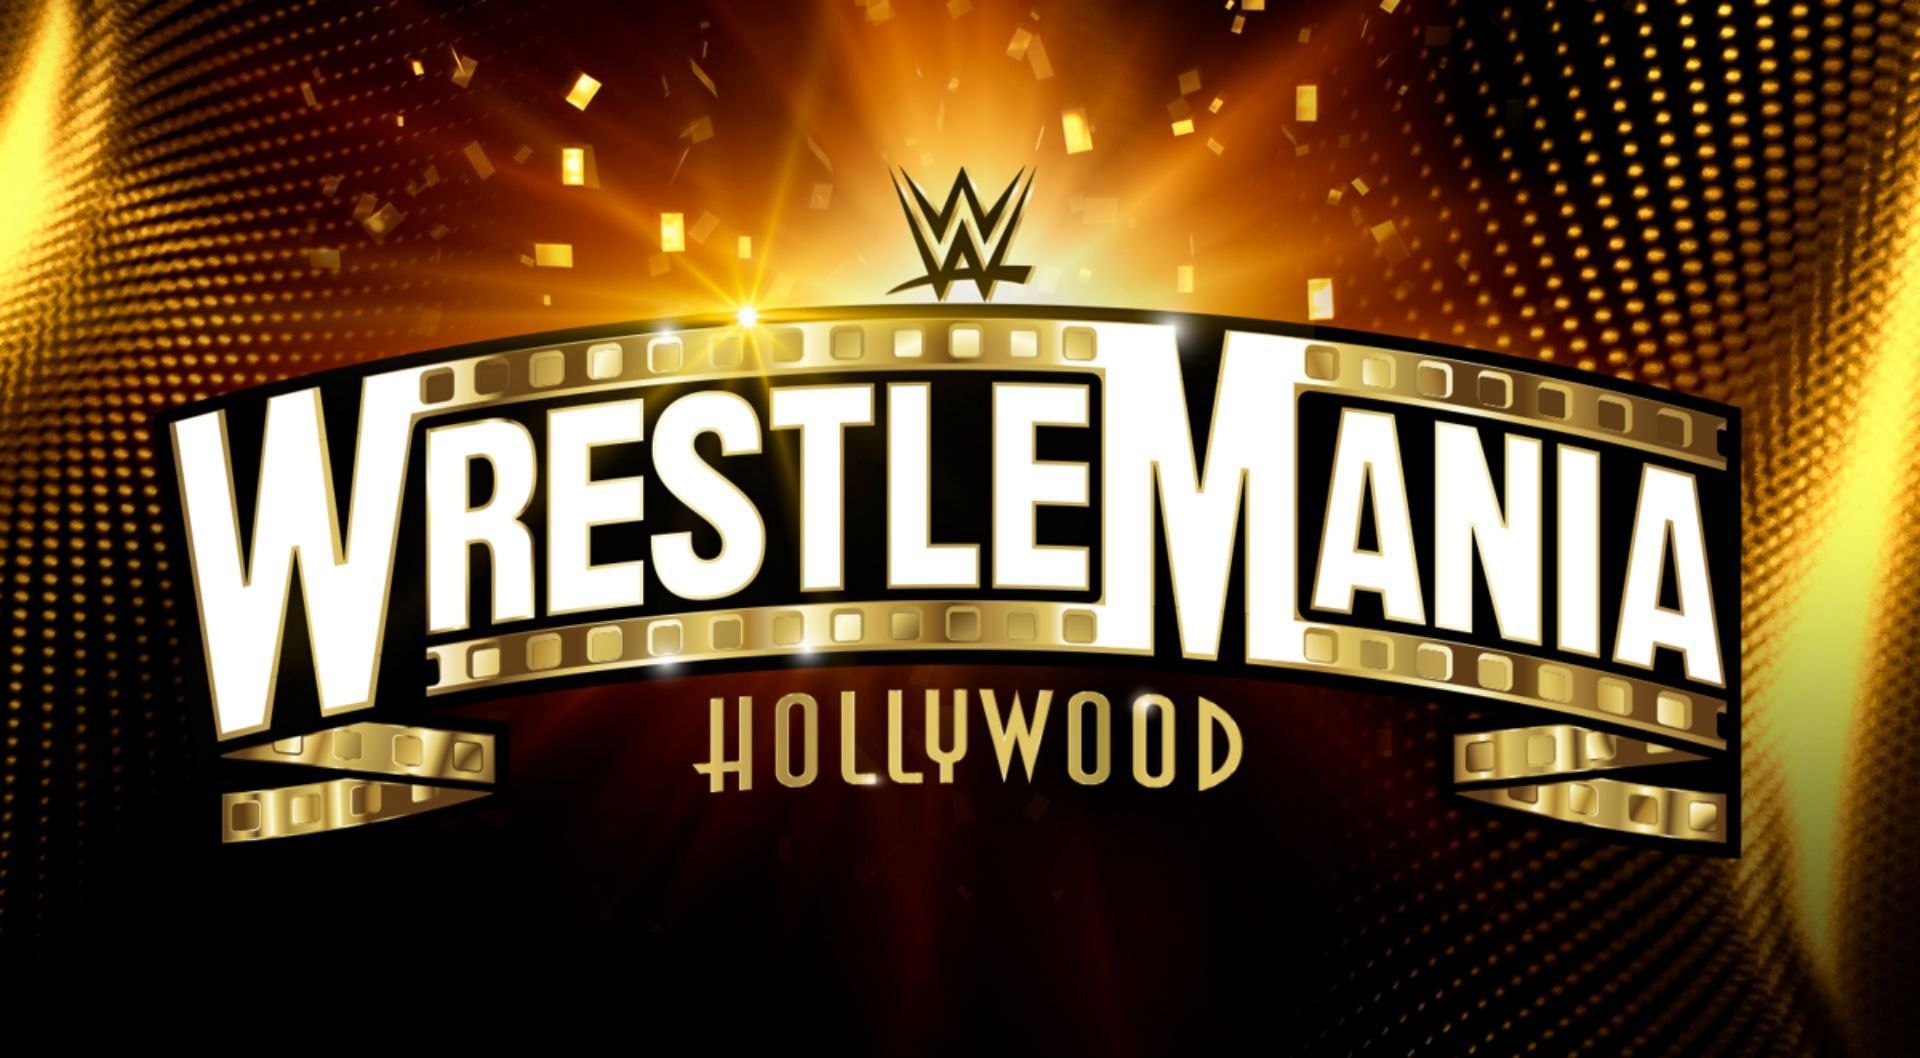 WrestleMania is set to take place in Los Angeles on April 1st and 2nd